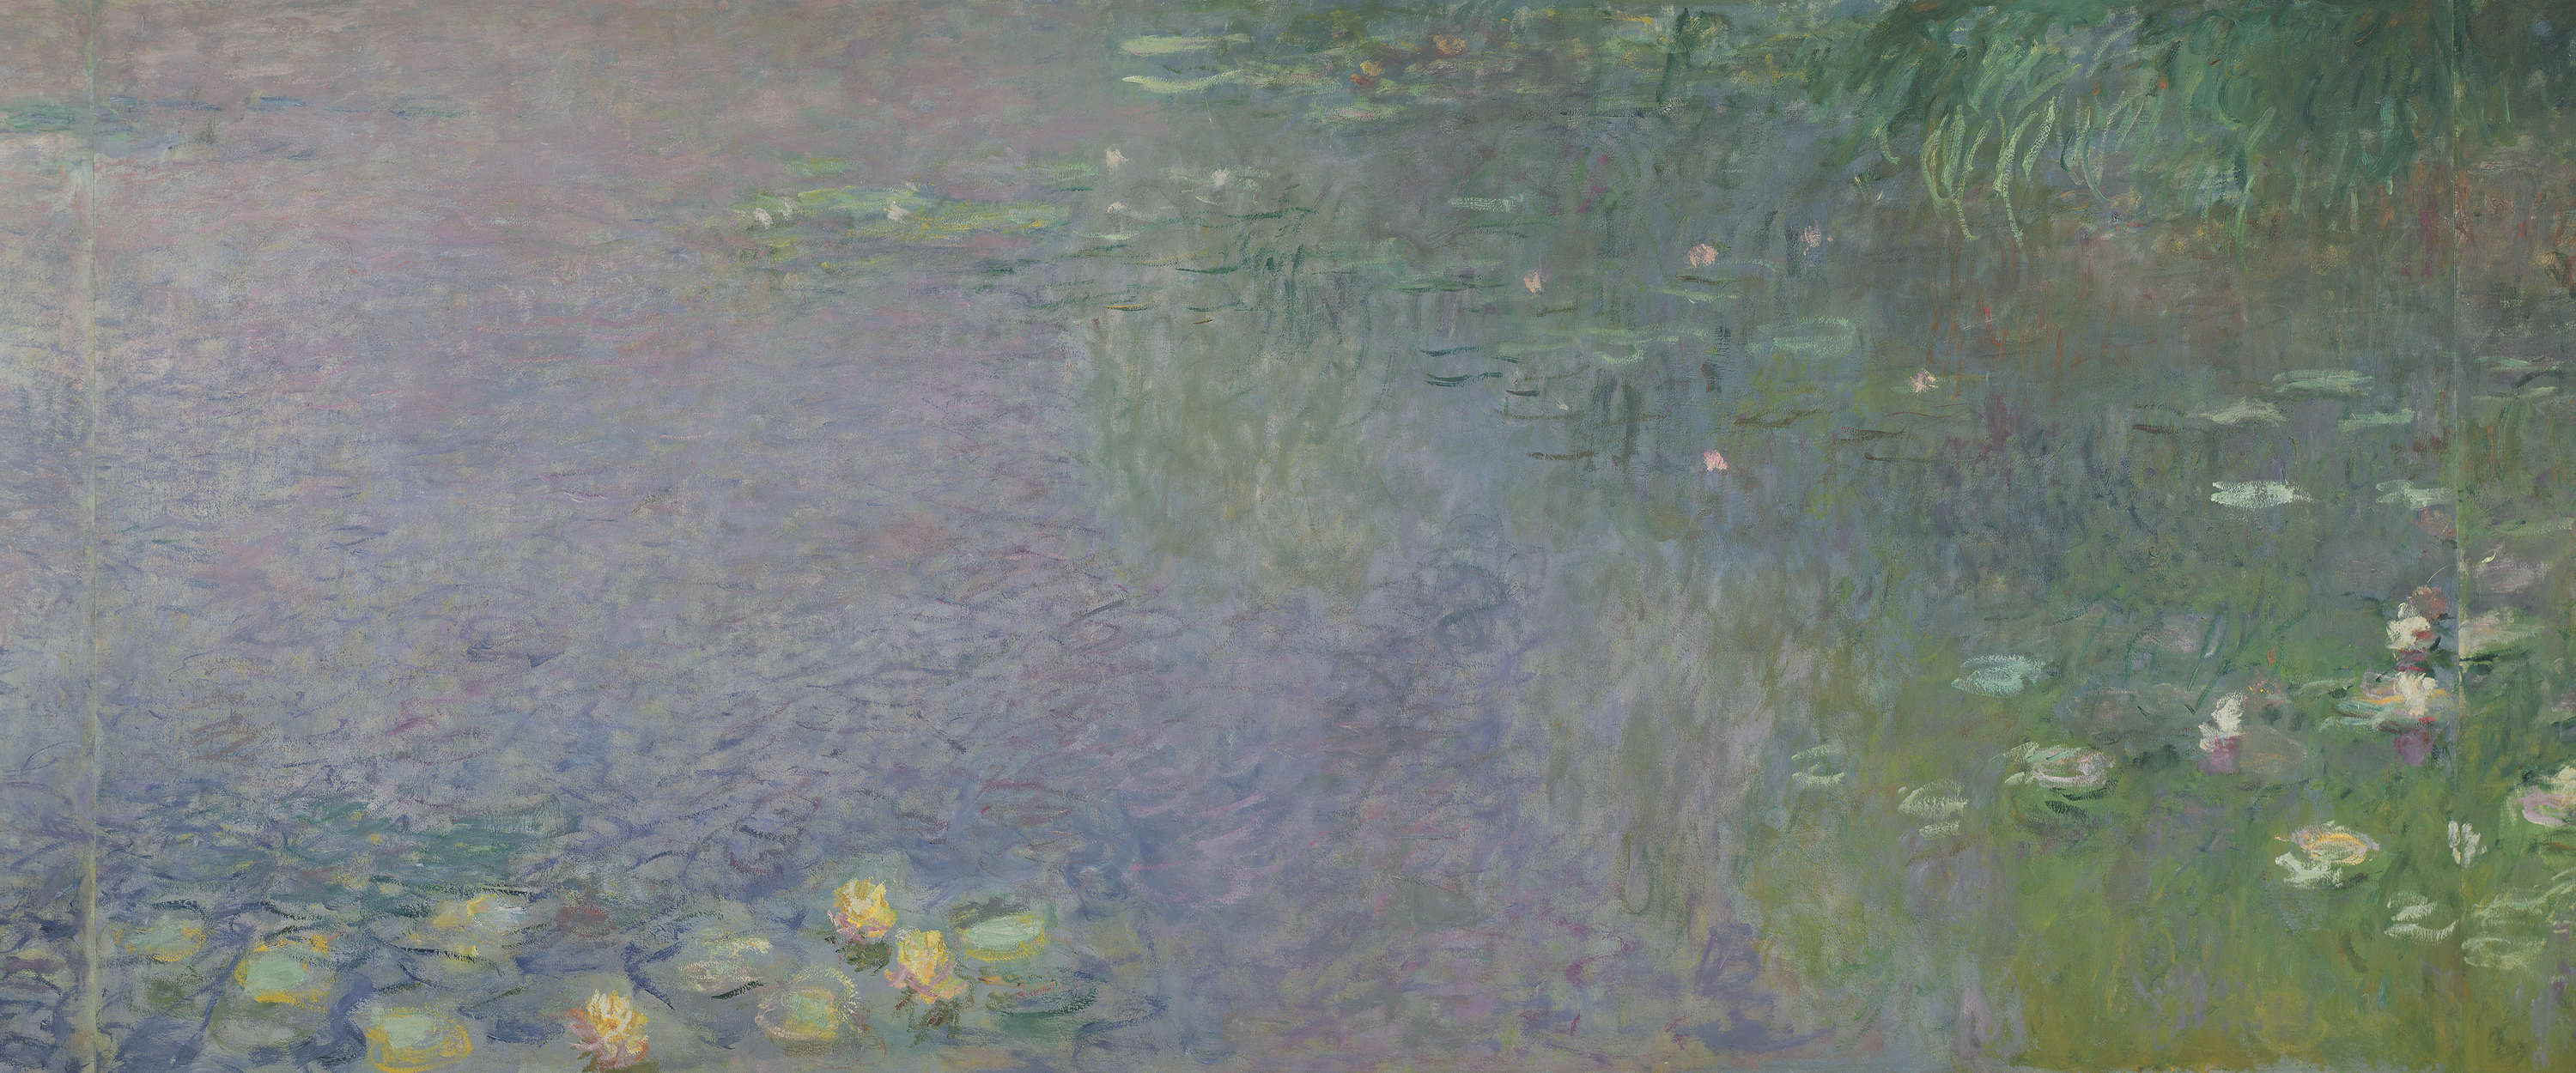             Photo wallpaper "Water Lilies: Morning" by Claude Monet
        